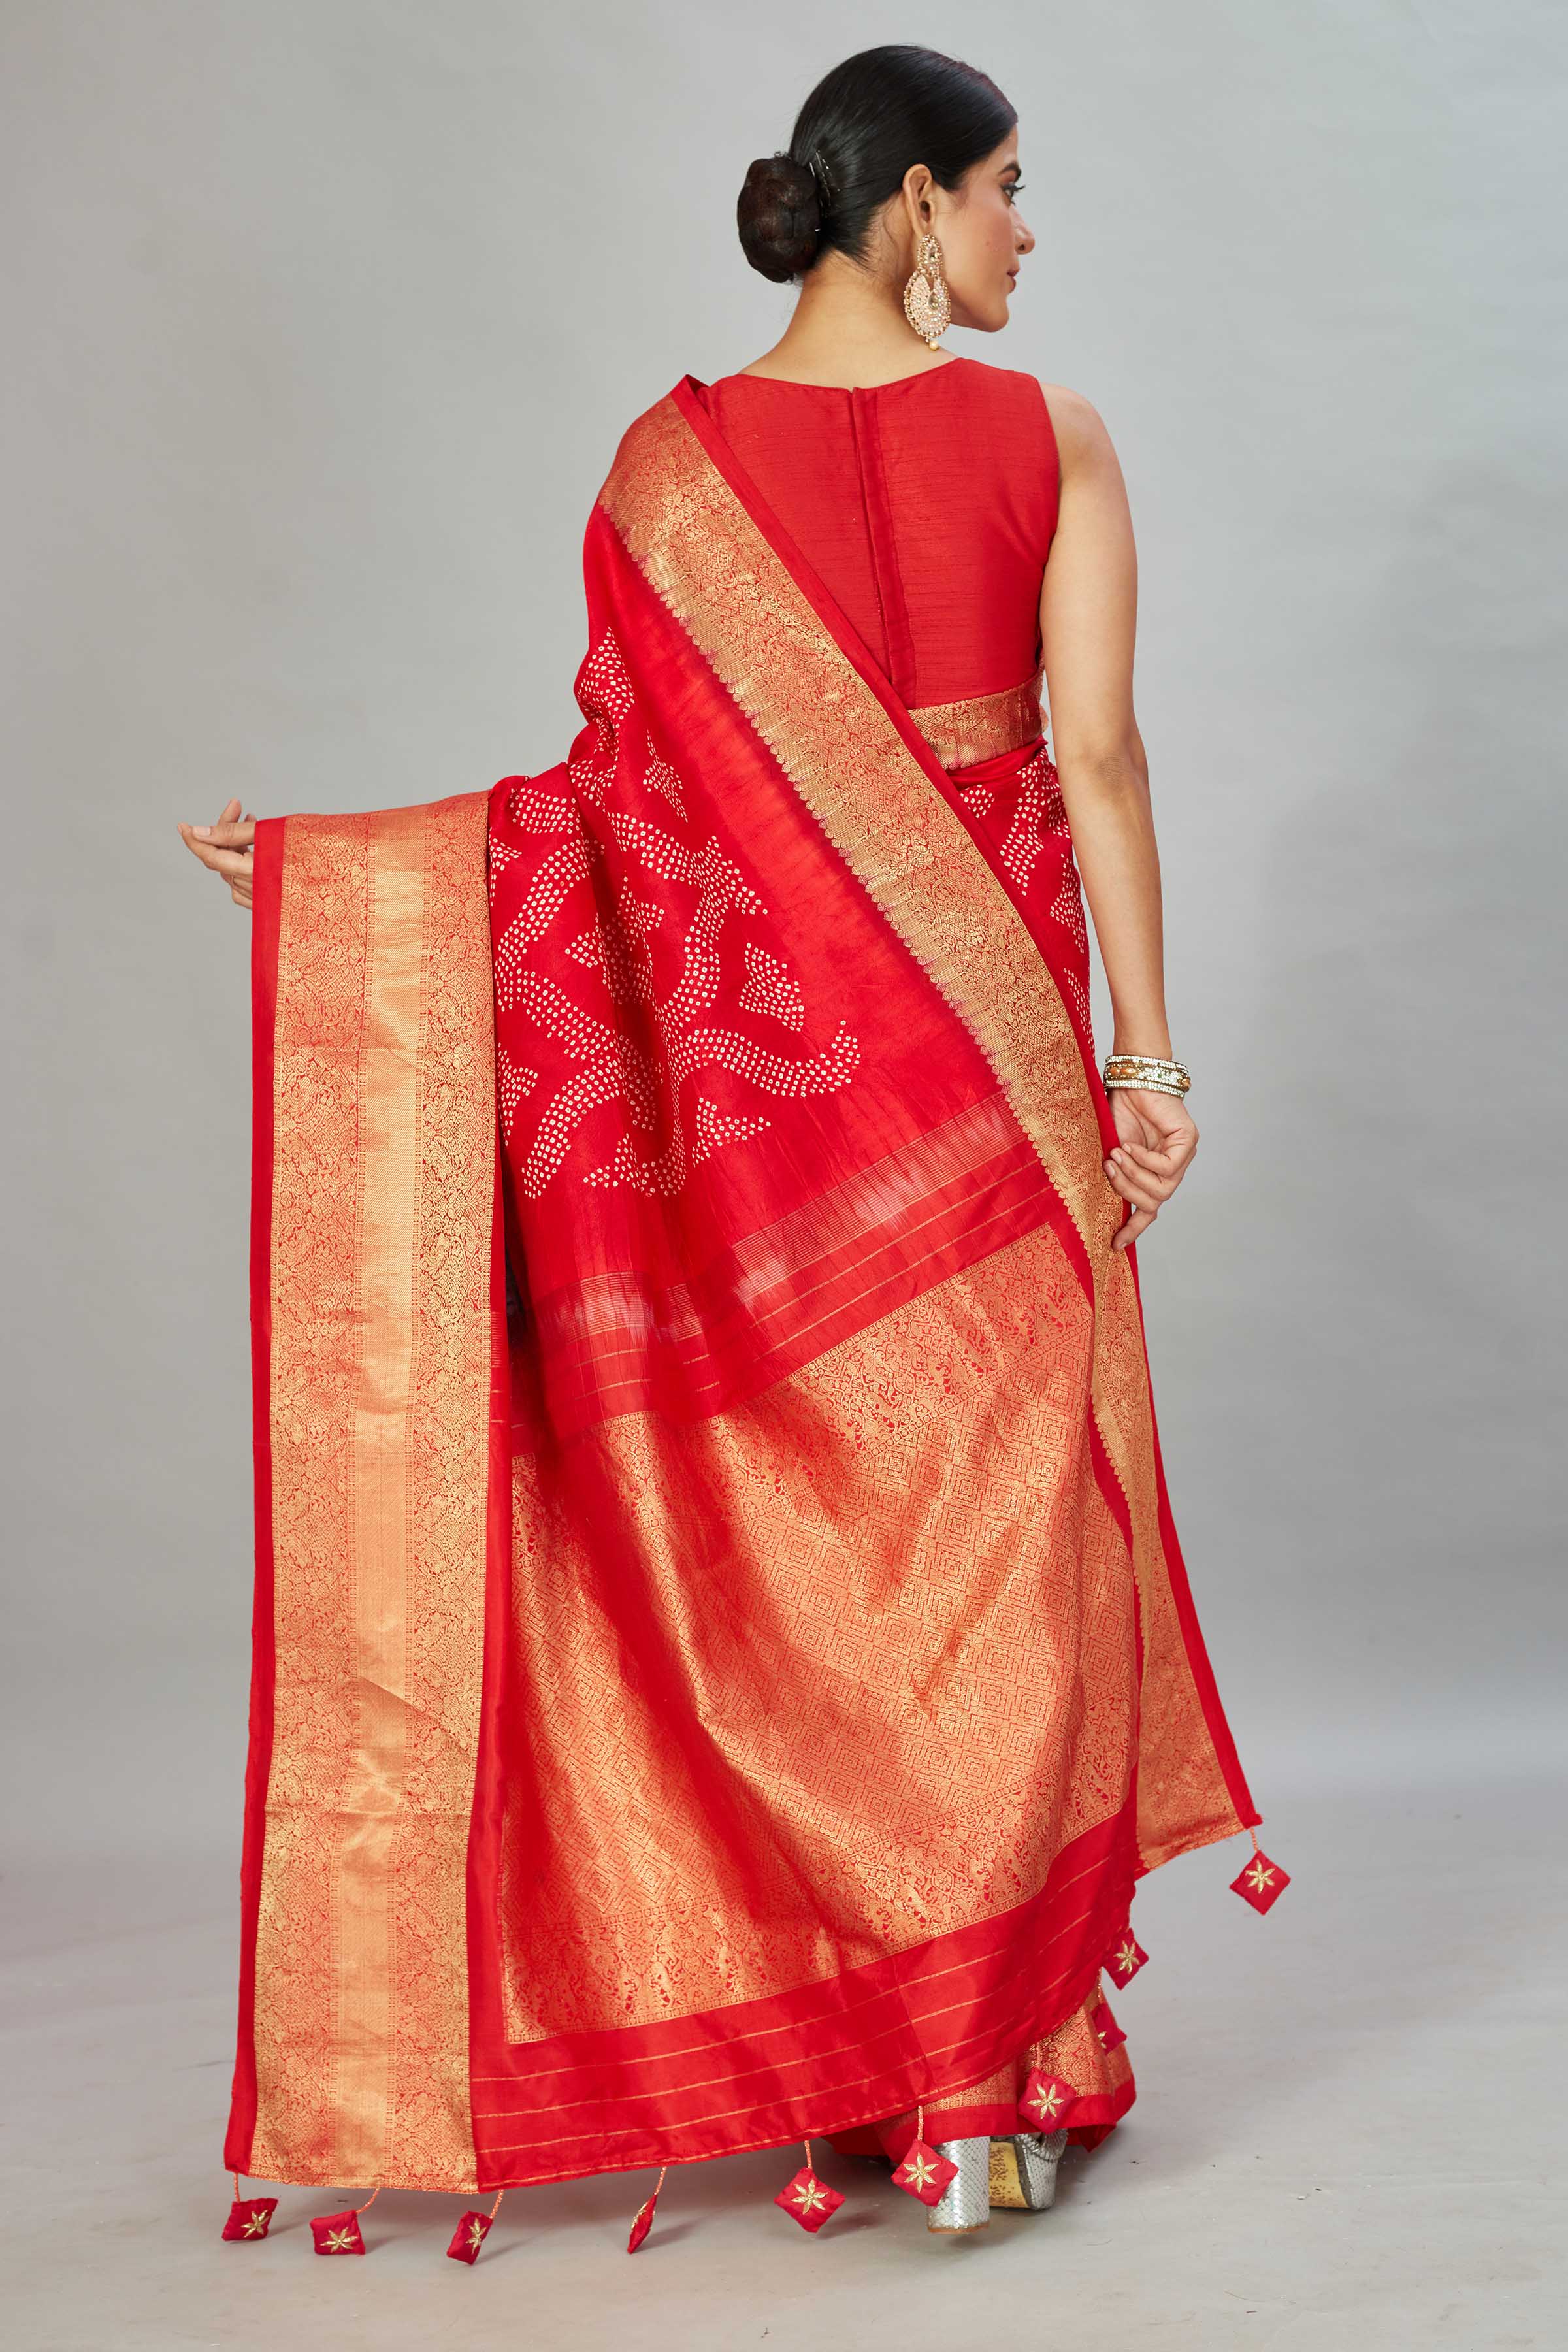 Buy red bandhej Kanjivaram silk saree online in USA with ikkat border. Look your best on festive occasions in latest designer sarees, pure silk sarees, Kanjivaram silk saris, handwoven saris, tussar silk sarees, embroidered saris from Pure Elegance Indian clothing store in USA.-back